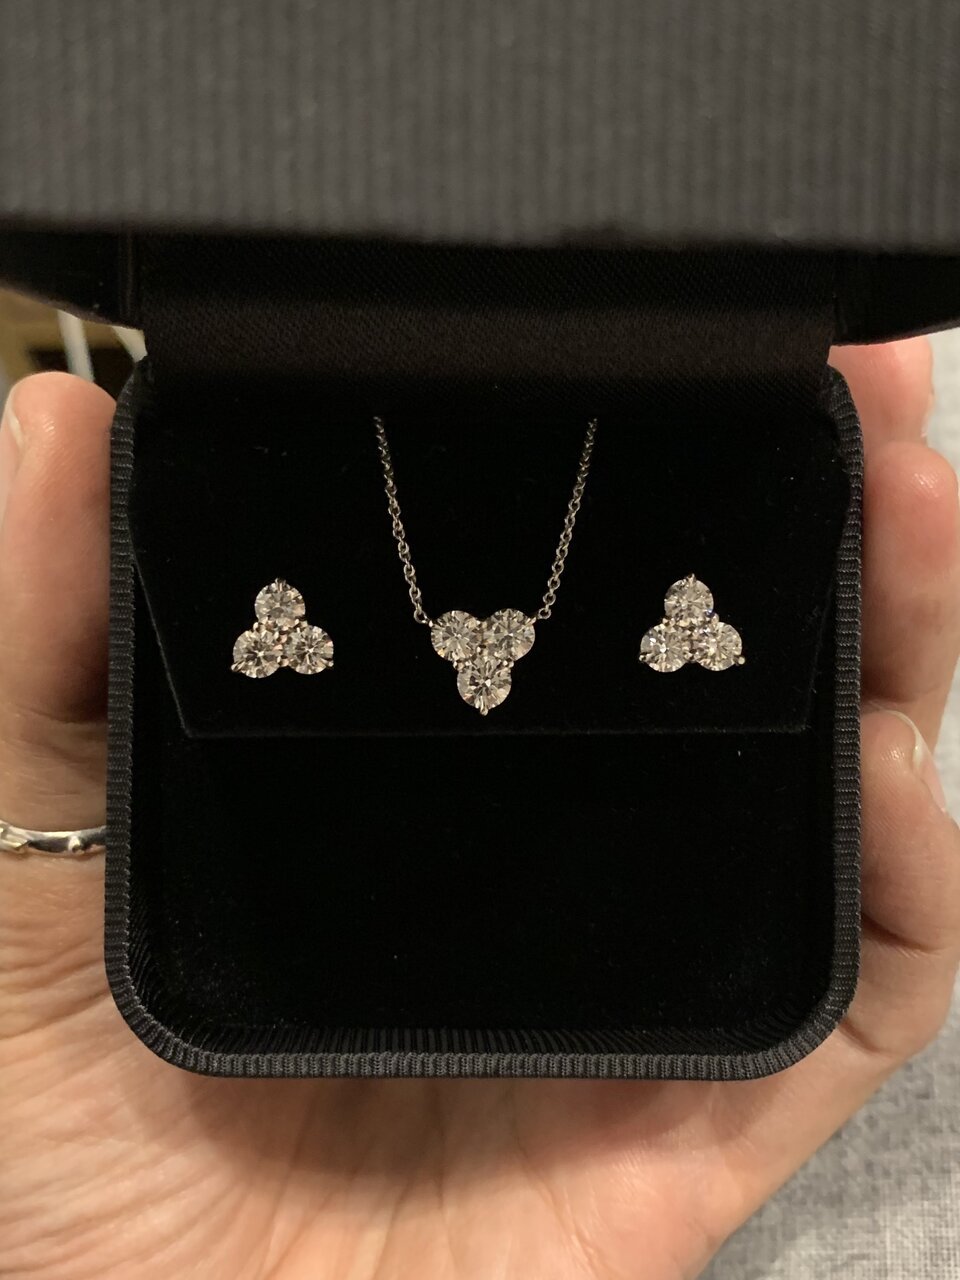 Mrsthomas posted this fabulous matched earring/necklace set in the Show Me the Bling forum at PriceScope.  Gorgeous, meaningful, celebratory…it hits all the marks!